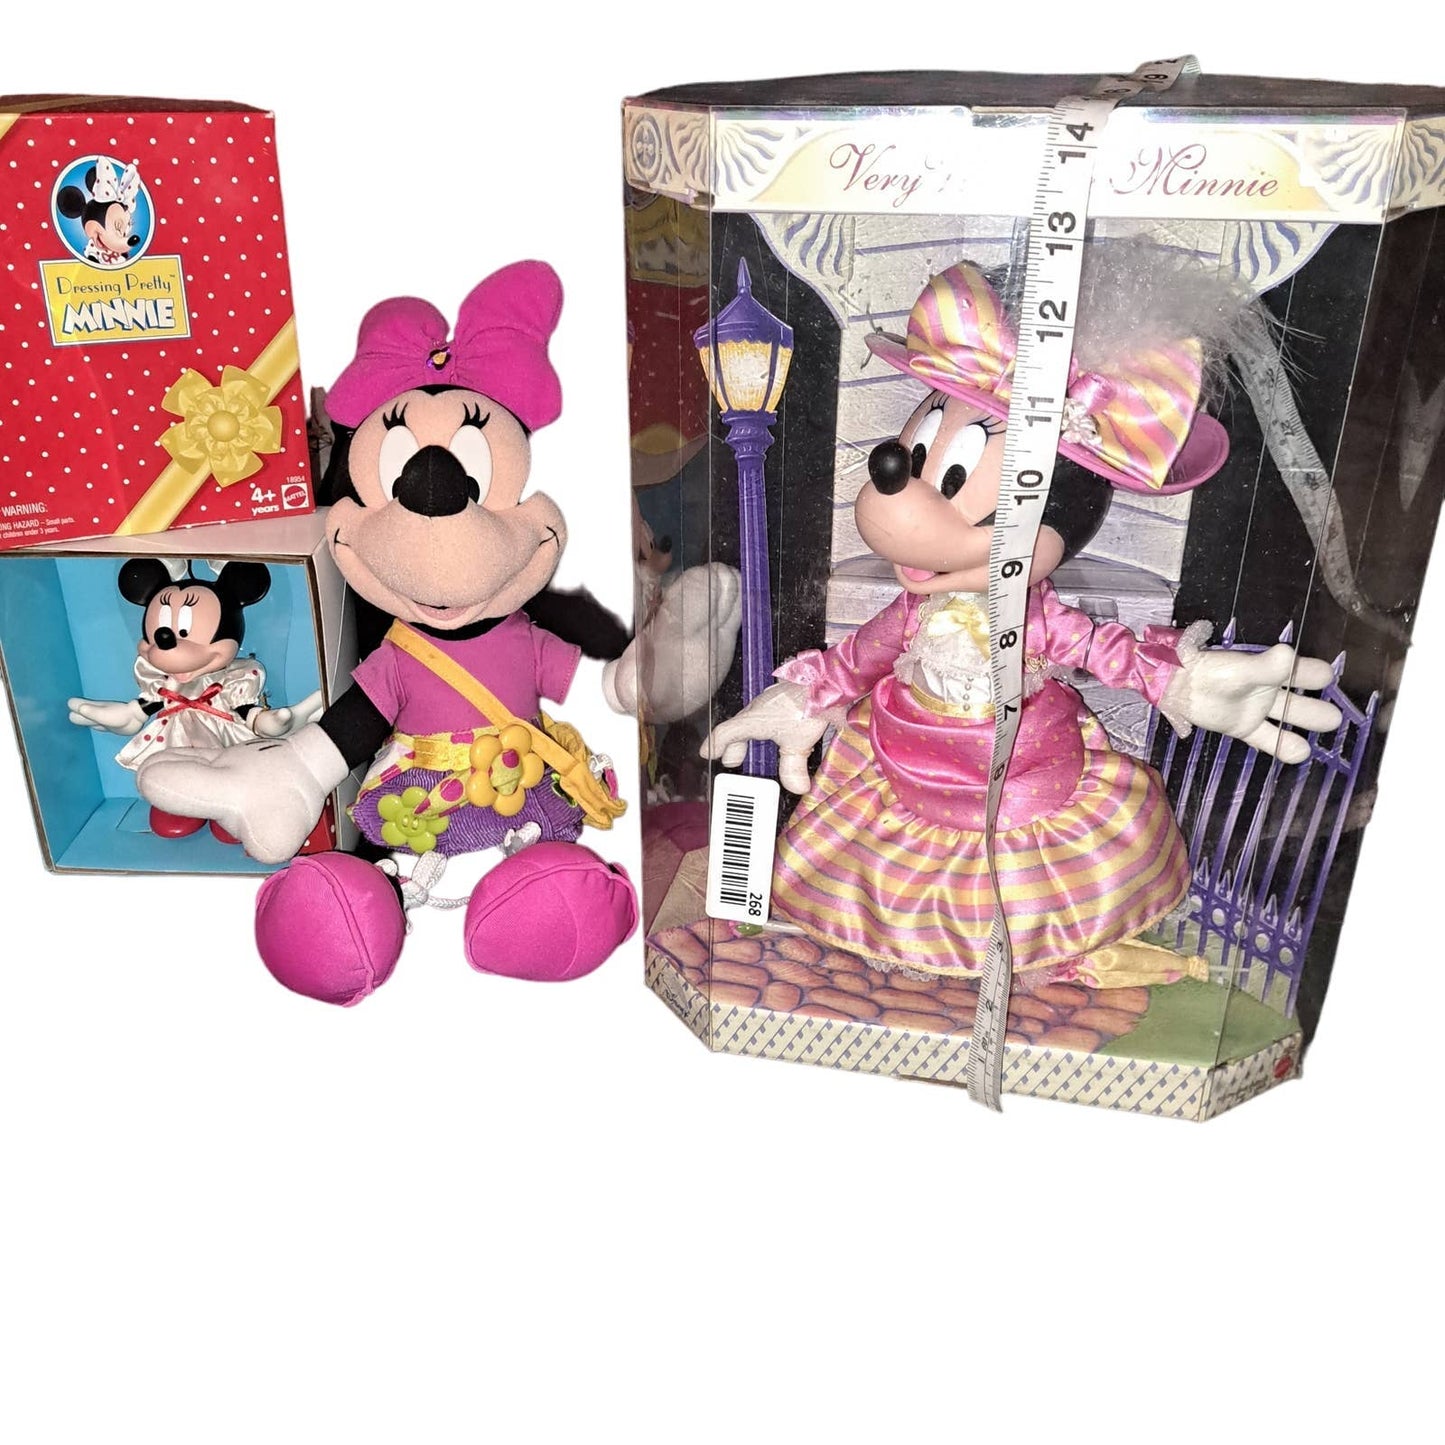 NIB-MINNIE MOUSE 3 Collectable Dolls! Very Victorian-Pretty Minnie-Dressed Up